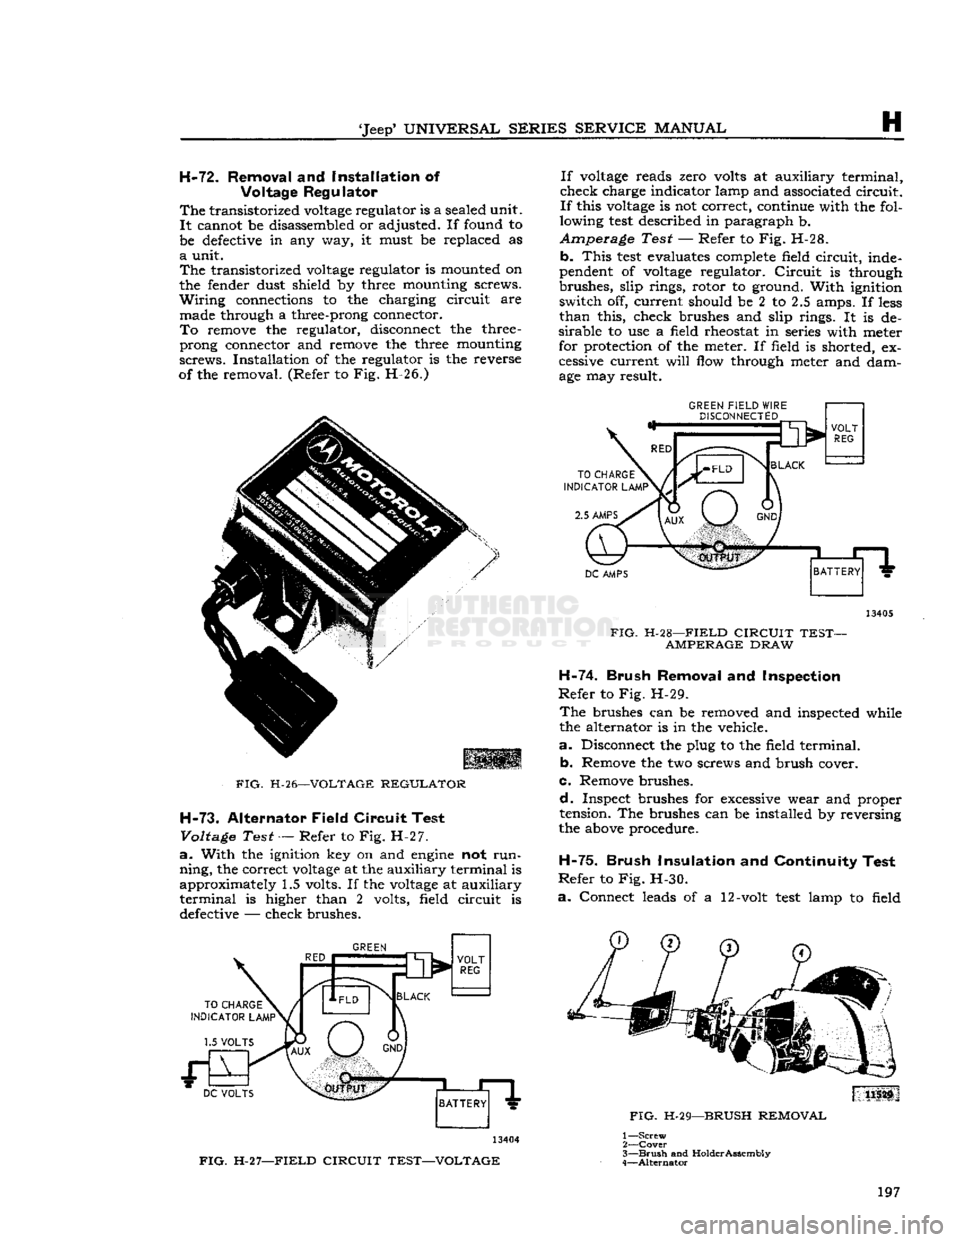 JEEP CJ 1953 Owners Manual 
Jeep
 UNIVERSAL SERIES SERVICE
 MANUAL 

H 
H-72.
 Removal
 and
 Installation
 of 

Voltage Regulator 

The
 transistorized
 voltage
 regulator is a sealed unit. 
 It
 cannot be disassembled or adj